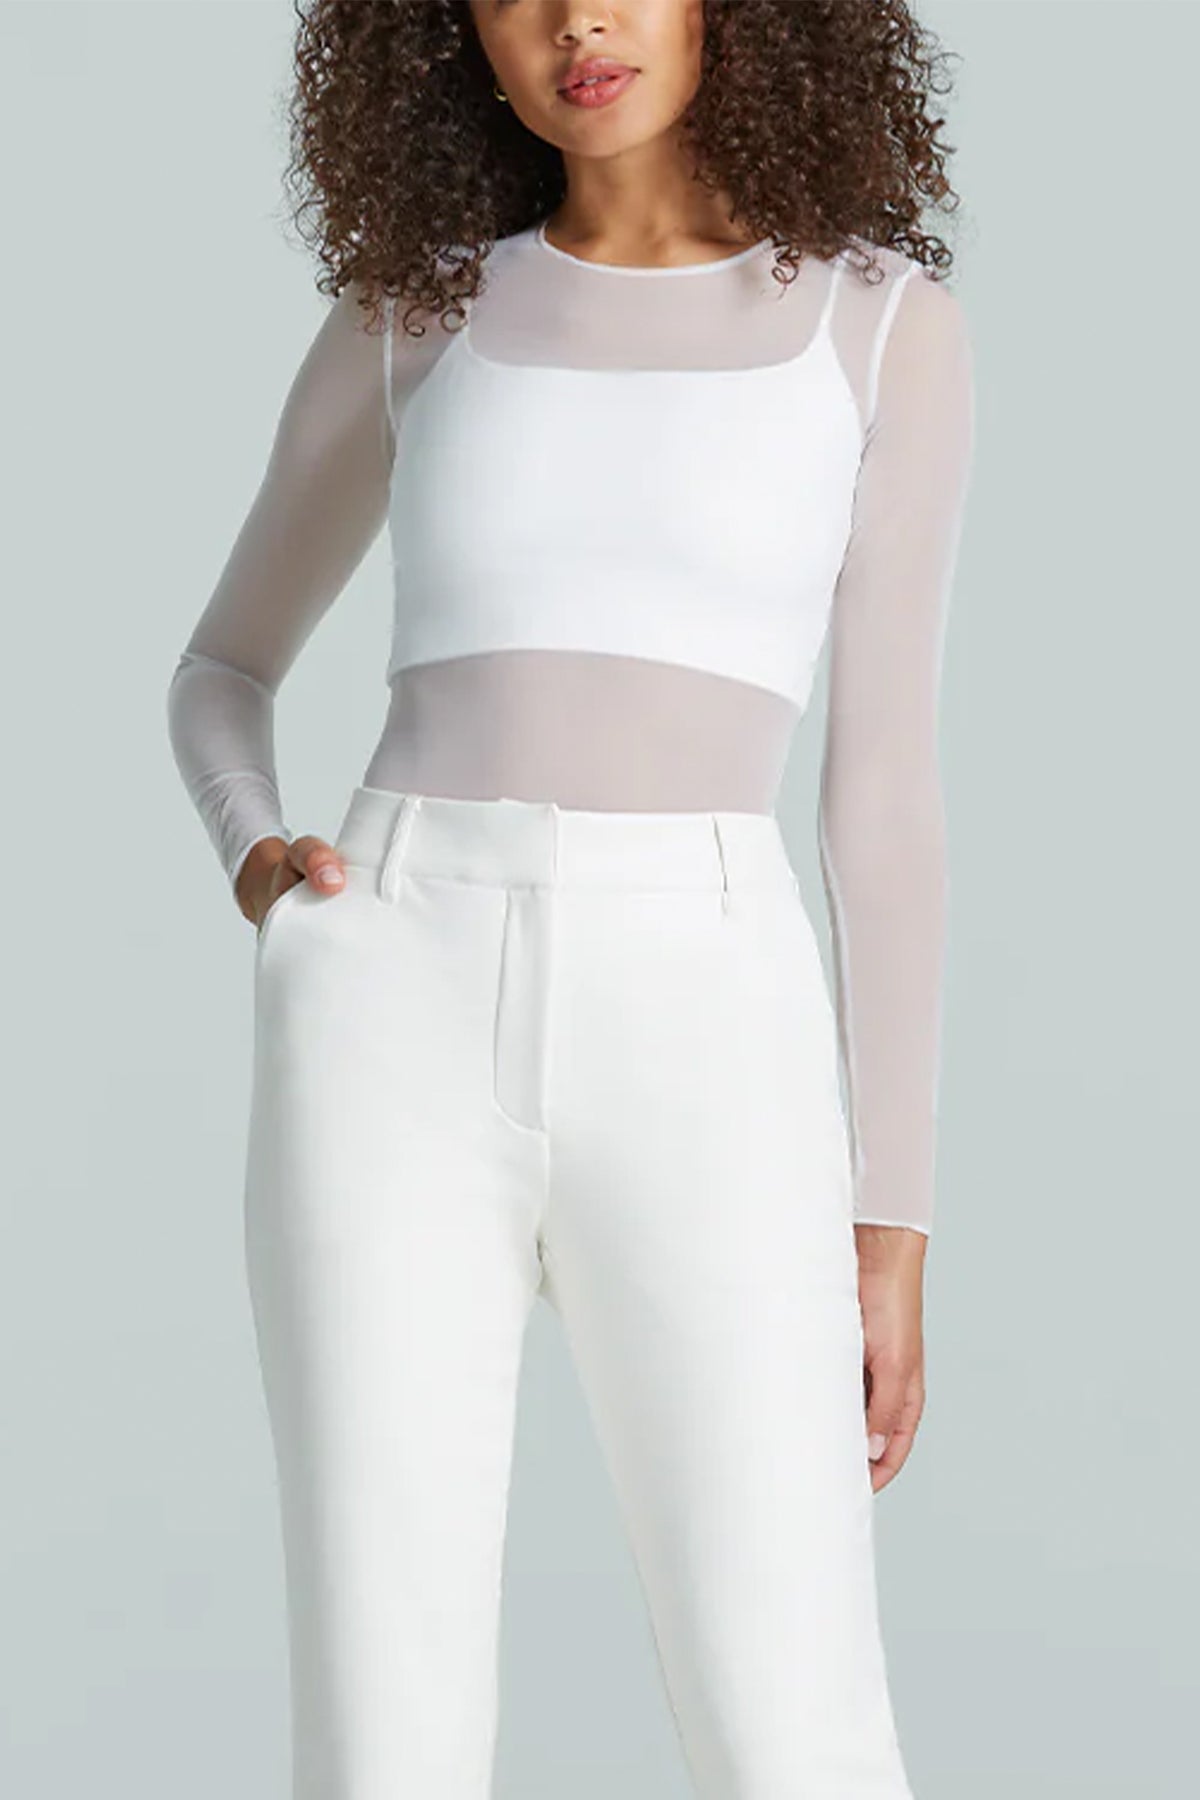 Chic Mesh Long Sleeve Tee in White - shop-olivia.com